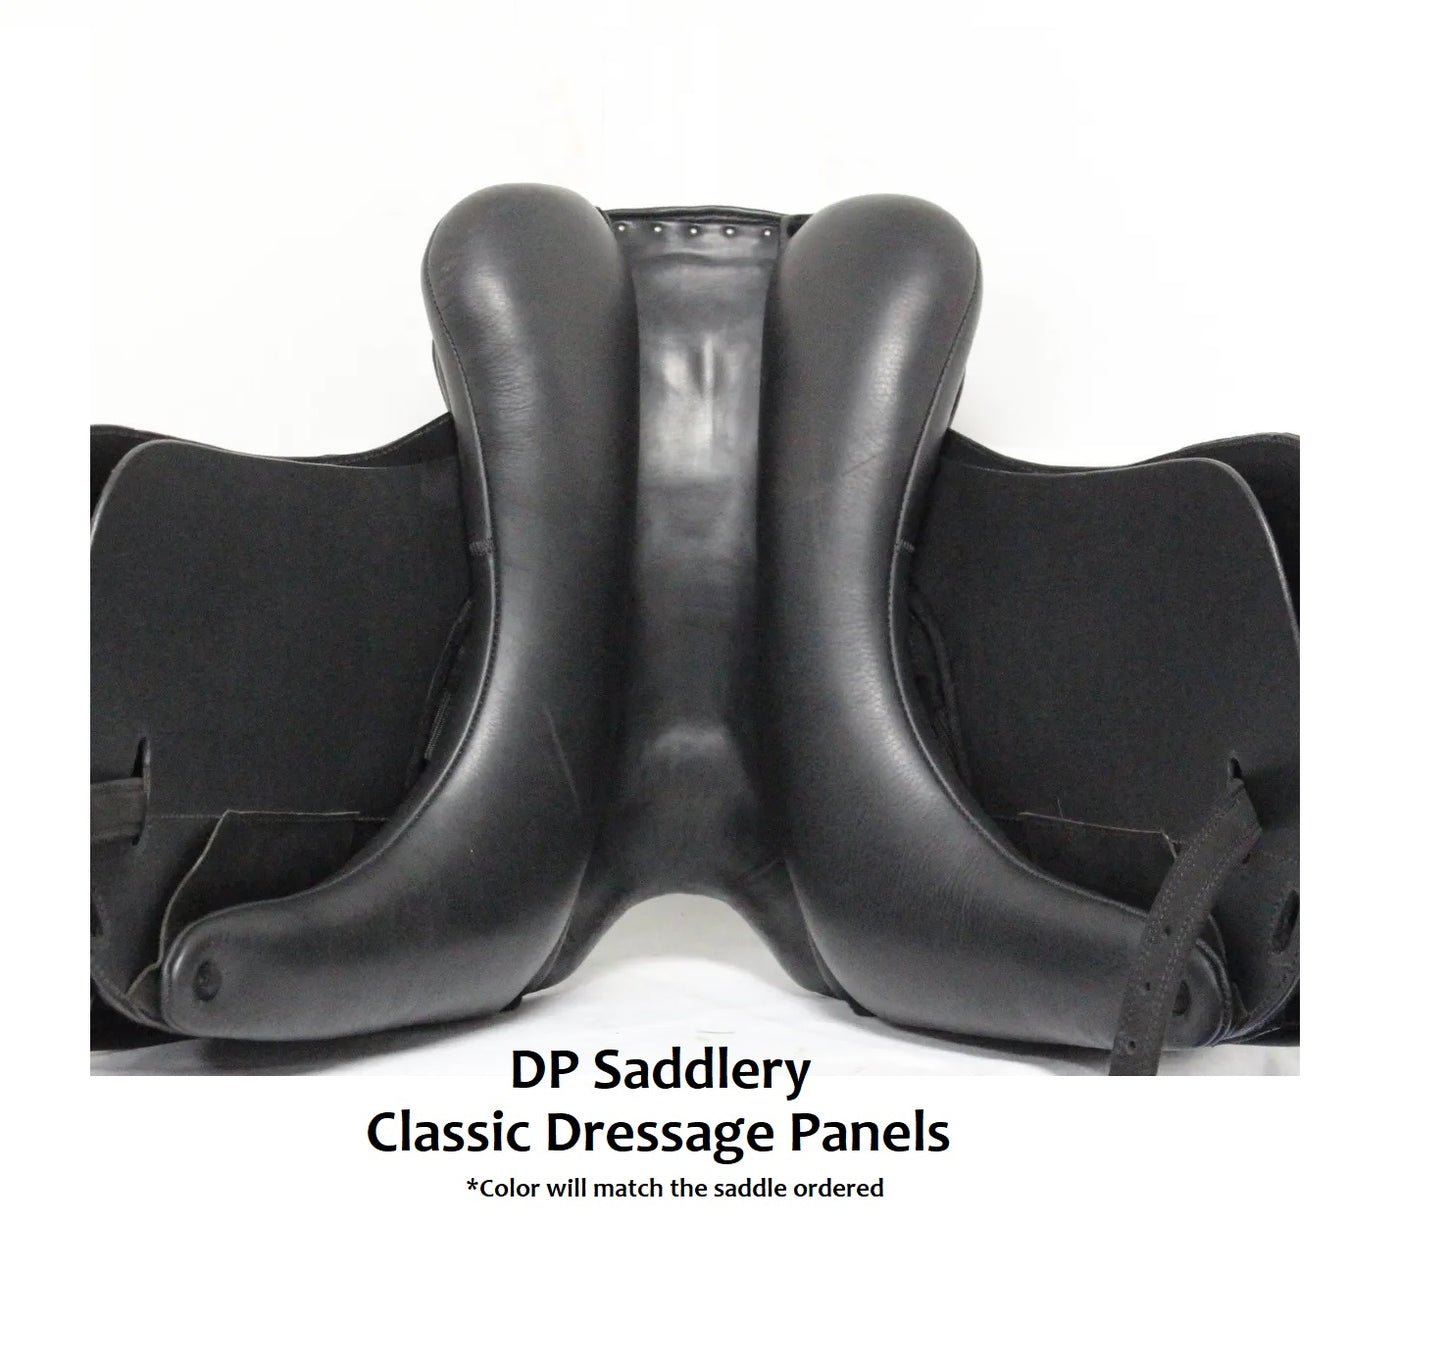 DP Saddlery Classic Dressage 5627 17.5 in